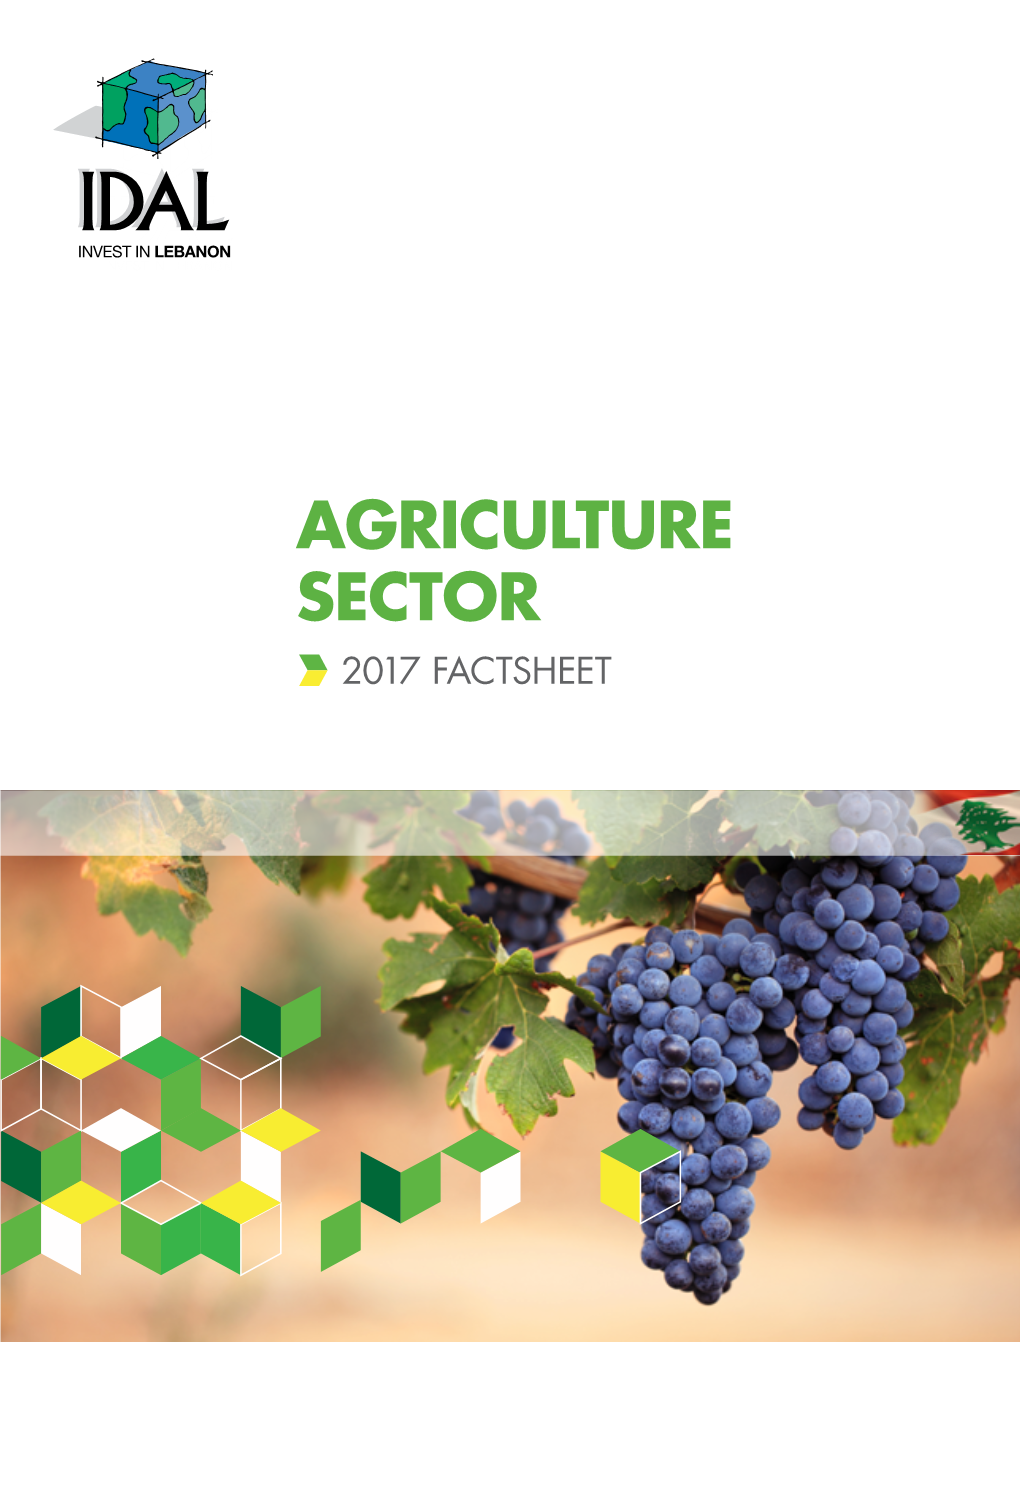 Agriculture Sector 2017 Factsheet Content